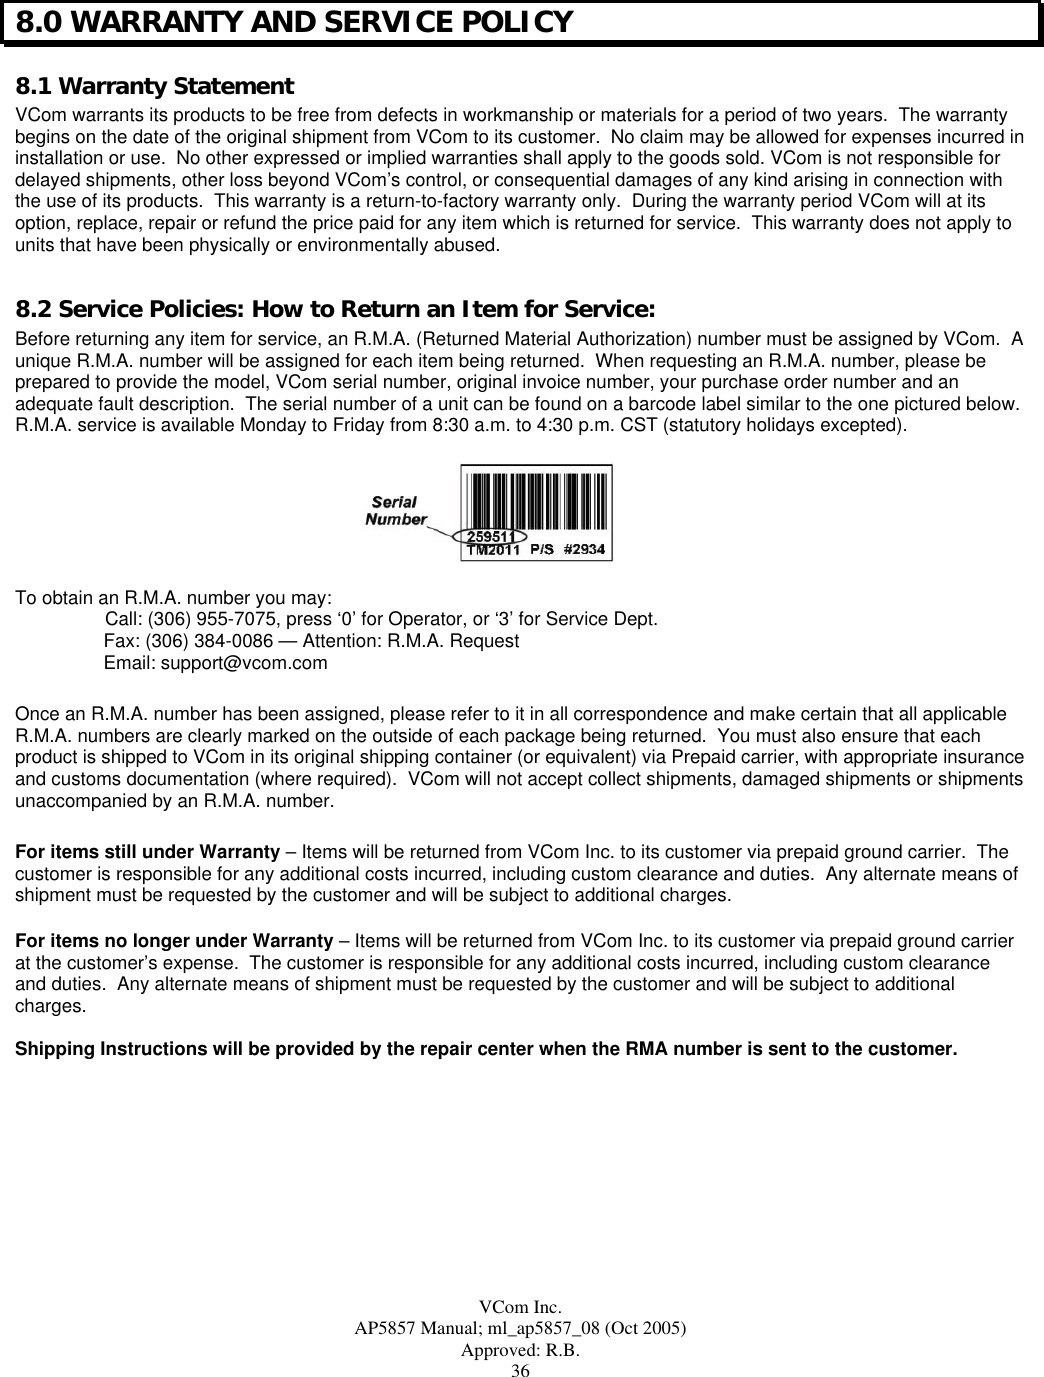  VCom Inc. AP5857 Manual; ml_ap5857_08 (Oct 2005) Approved: R.B. 36 8.0 WARRANTY AND SERVICE POLICY 8.1 Warranty Statement VCom warrants its products to be free from defects in workmanship or materials for a period of two years.  The warranty begins on the date of the original shipment from VCom to its customer.  No claim may be allowed for expenses incurred in installation or use.  No other expressed or implied warranties shall apply to the goods sold. VCom is not responsible for delayed shipments, other loss beyond VCom’s control, or consequential damages of any kind arising in connection with the use of its products.  This warranty is a return-to-factory warranty only.  During the warranty period VCom will at its option, replace, repair or refund the price paid for any item which is returned for service.  This warranty does not apply to units that have been physically or environmentally abused.  8.2 Service Policies: How to Return an Item for Service: Before returning any item for service, an R.M.A. (Returned Material Authorization) number must be assigned by VCom.  A unique R.M.A. number will be assigned for each item being returned.  When requesting an R.M.A. number, please be prepared to provide the model, VCom serial number, original invoice number, your purchase order number and an adequate fault description.  The serial number of a unit can be found on a barcode label similar to the one pictured below.  R.M.A. service is available Monday to Friday from 8:30 a.m. to 4:30 p.m. CST (statutory holidays excepted).      To obtain an R.M.A. number you may:   Call: (306) 955-7075, press ‘0’ for Operator, or ‘3’ for Service Dept. Fax: (306) 384-0086 — Attention: R.M.A. Request Email: support@vcom.com  Once an R.M.A. number has been assigned, please refer to it in all correspondence and make certain that all applicable R.M.A. numbers are clearly marked on the outside of each package being returned.  You must also ensure that each product is shipped to VCom in its original shipping container (or equivalent) via Prepaid carrier, with appropriate insurance and customs documentation (where required).  VCom will not accept collect shipments, damaged shipments or shipments unaccompanied by an R.M.A. number.  For items still under Warranty – Items will be returned from VCom Inc. to its customer via prepaid ground carrier.  The customer is responsible for any additional costs incurred, including custom clearance and duties.  Any alternate means of shipment must be requested by the customer and will be subject to additional charges.   For items no longer under Warranty – Items will be returned from VCom Inc. to its customer via prepaid ground carrier at the customer’s expense.  The customer is responsible for any additional costs incurred, including custom clearance and duties.  Any alternate means of shipment must be requested by the customer and will be subject to additional charges.  Shipping Instructions will be provided by the repair center when the RMA number is sent to the customer. 